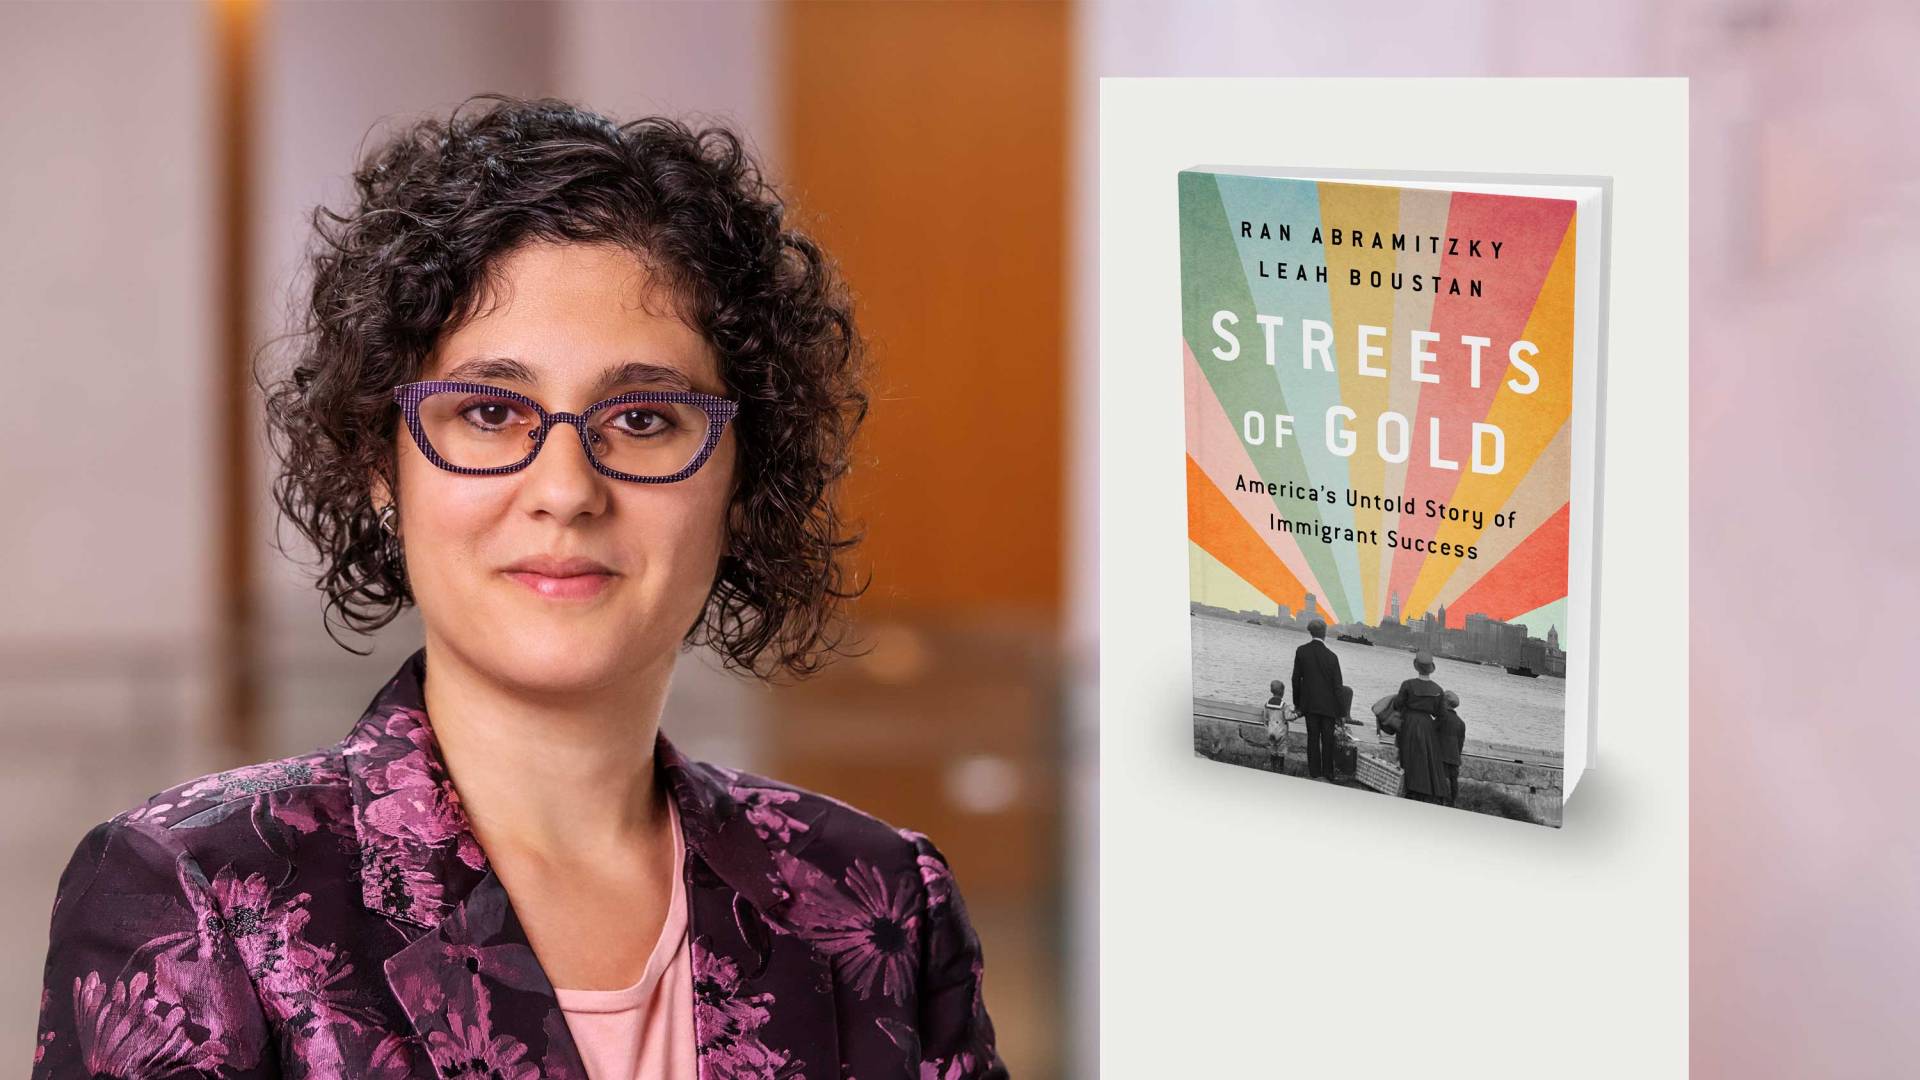 Leah Boustan and the cover of her book, Streets of Gold: America's Untold Story of Immigrant Success